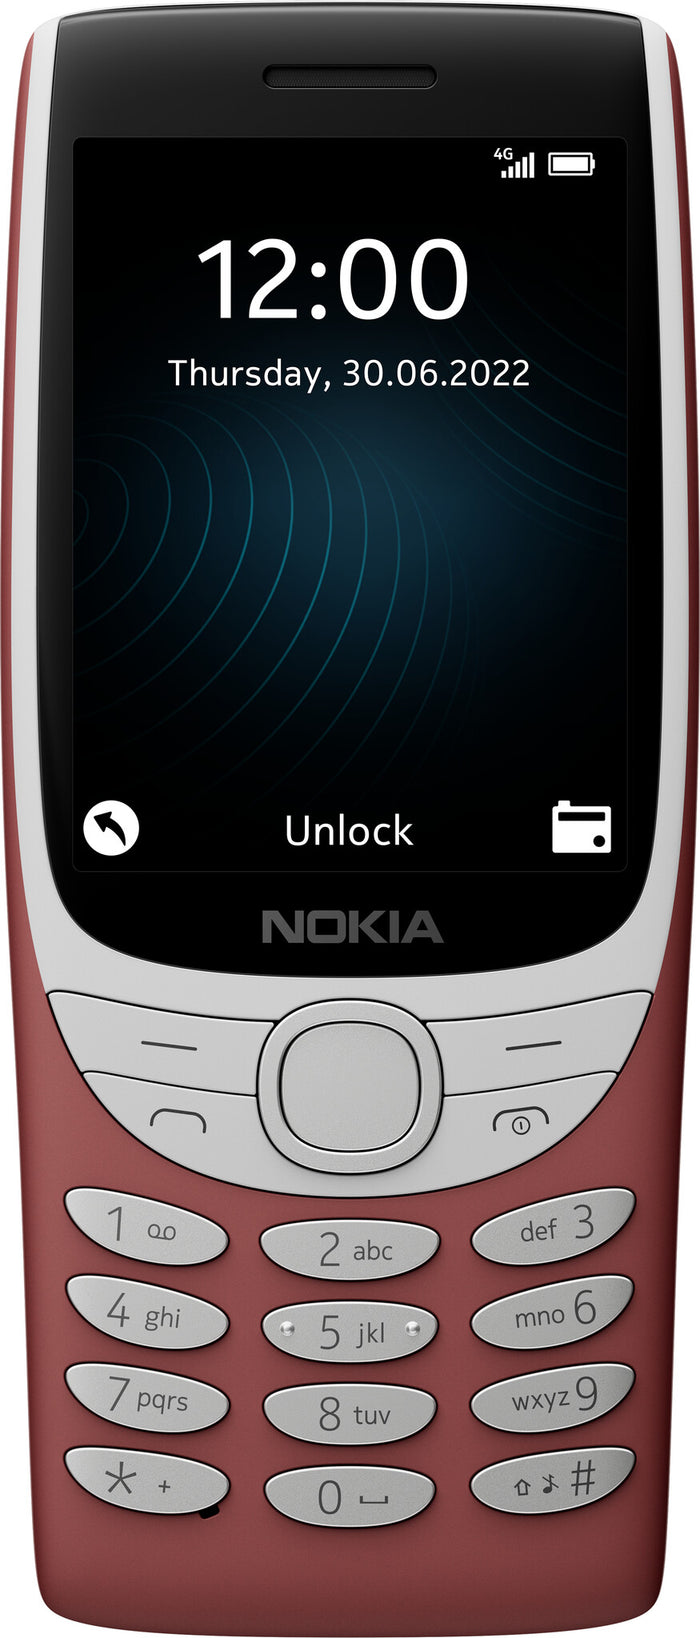 Nokia 8210 4G 7.11 cm (2.8) 107 g Red Feature phone